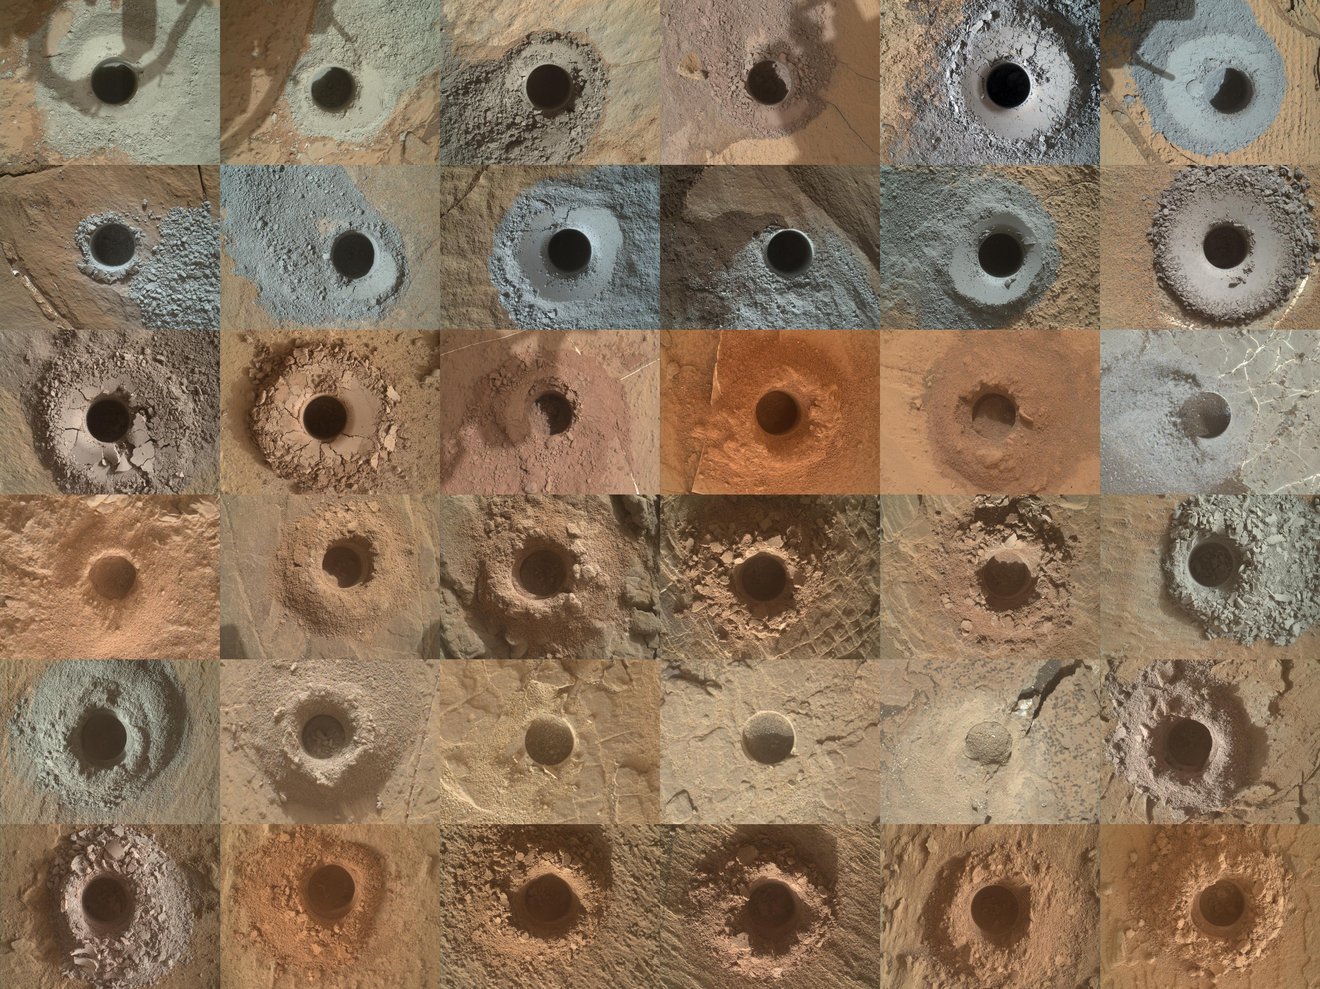 Curiosity has created 36 drill holes using the drill on its robotic arm.